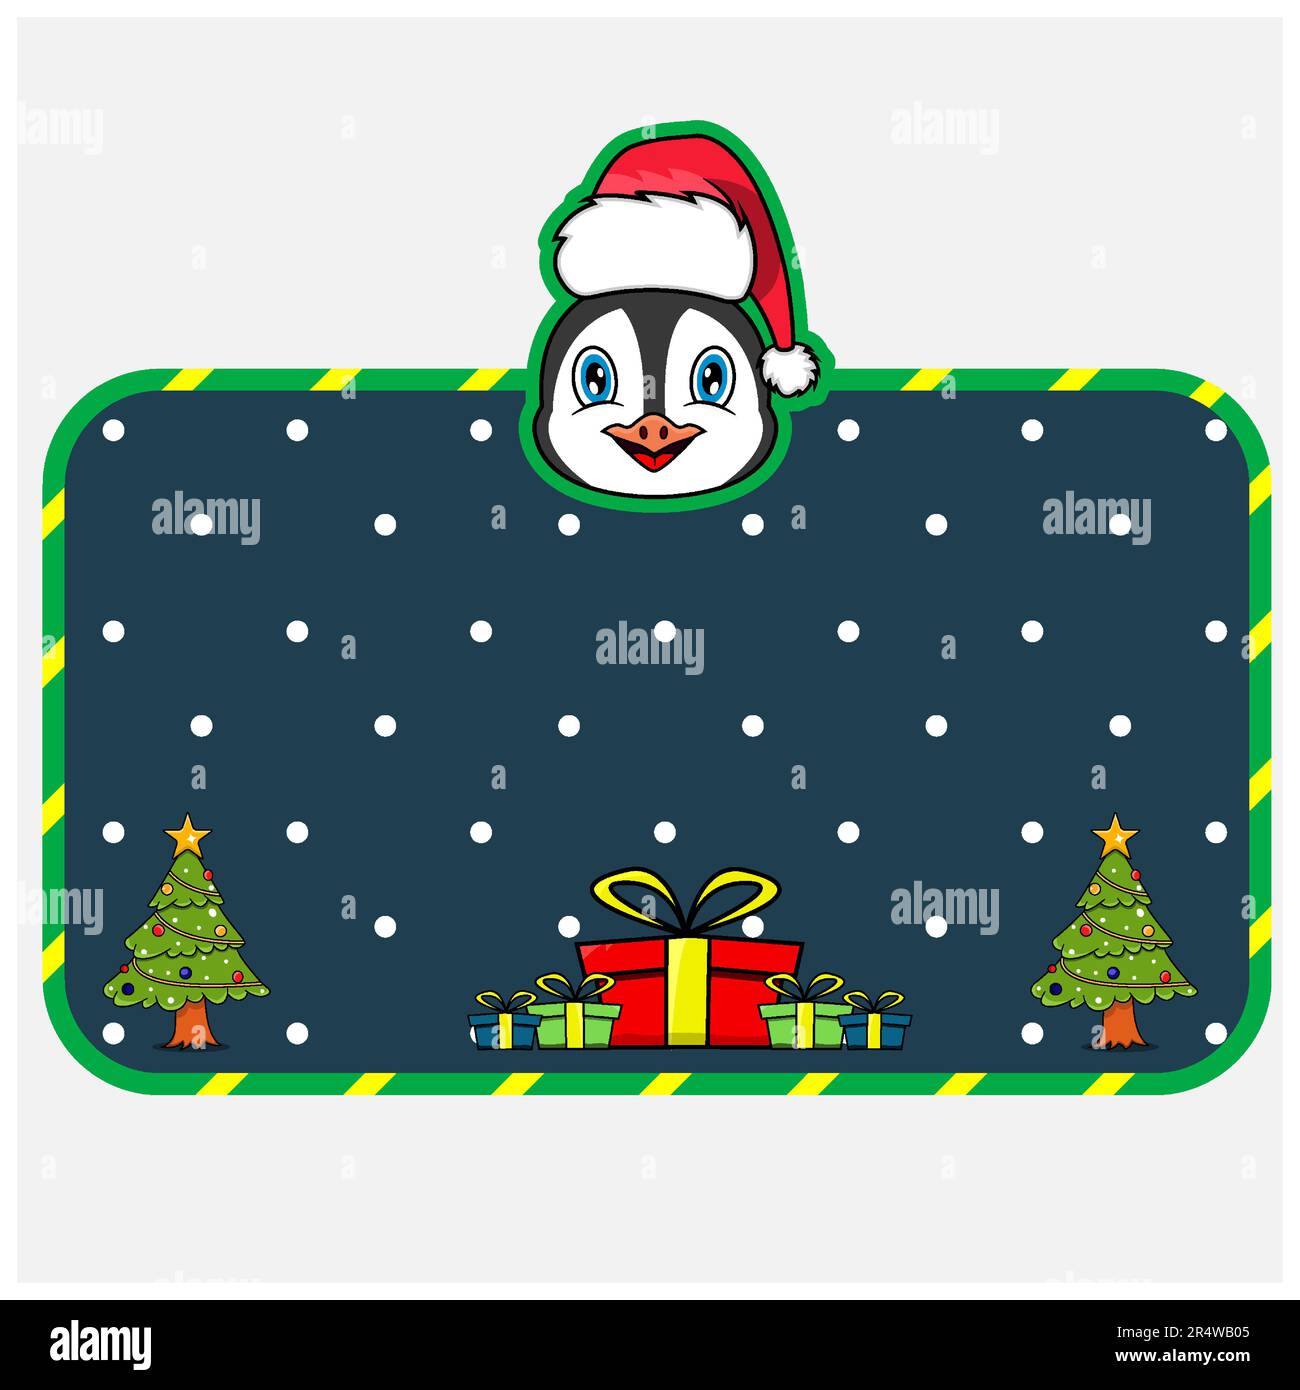 Christmas and New Year Greeting Card With Penguin Character Design. Head Animal Wearing Christmas Hat. Vector And Illustration. Stock Vector